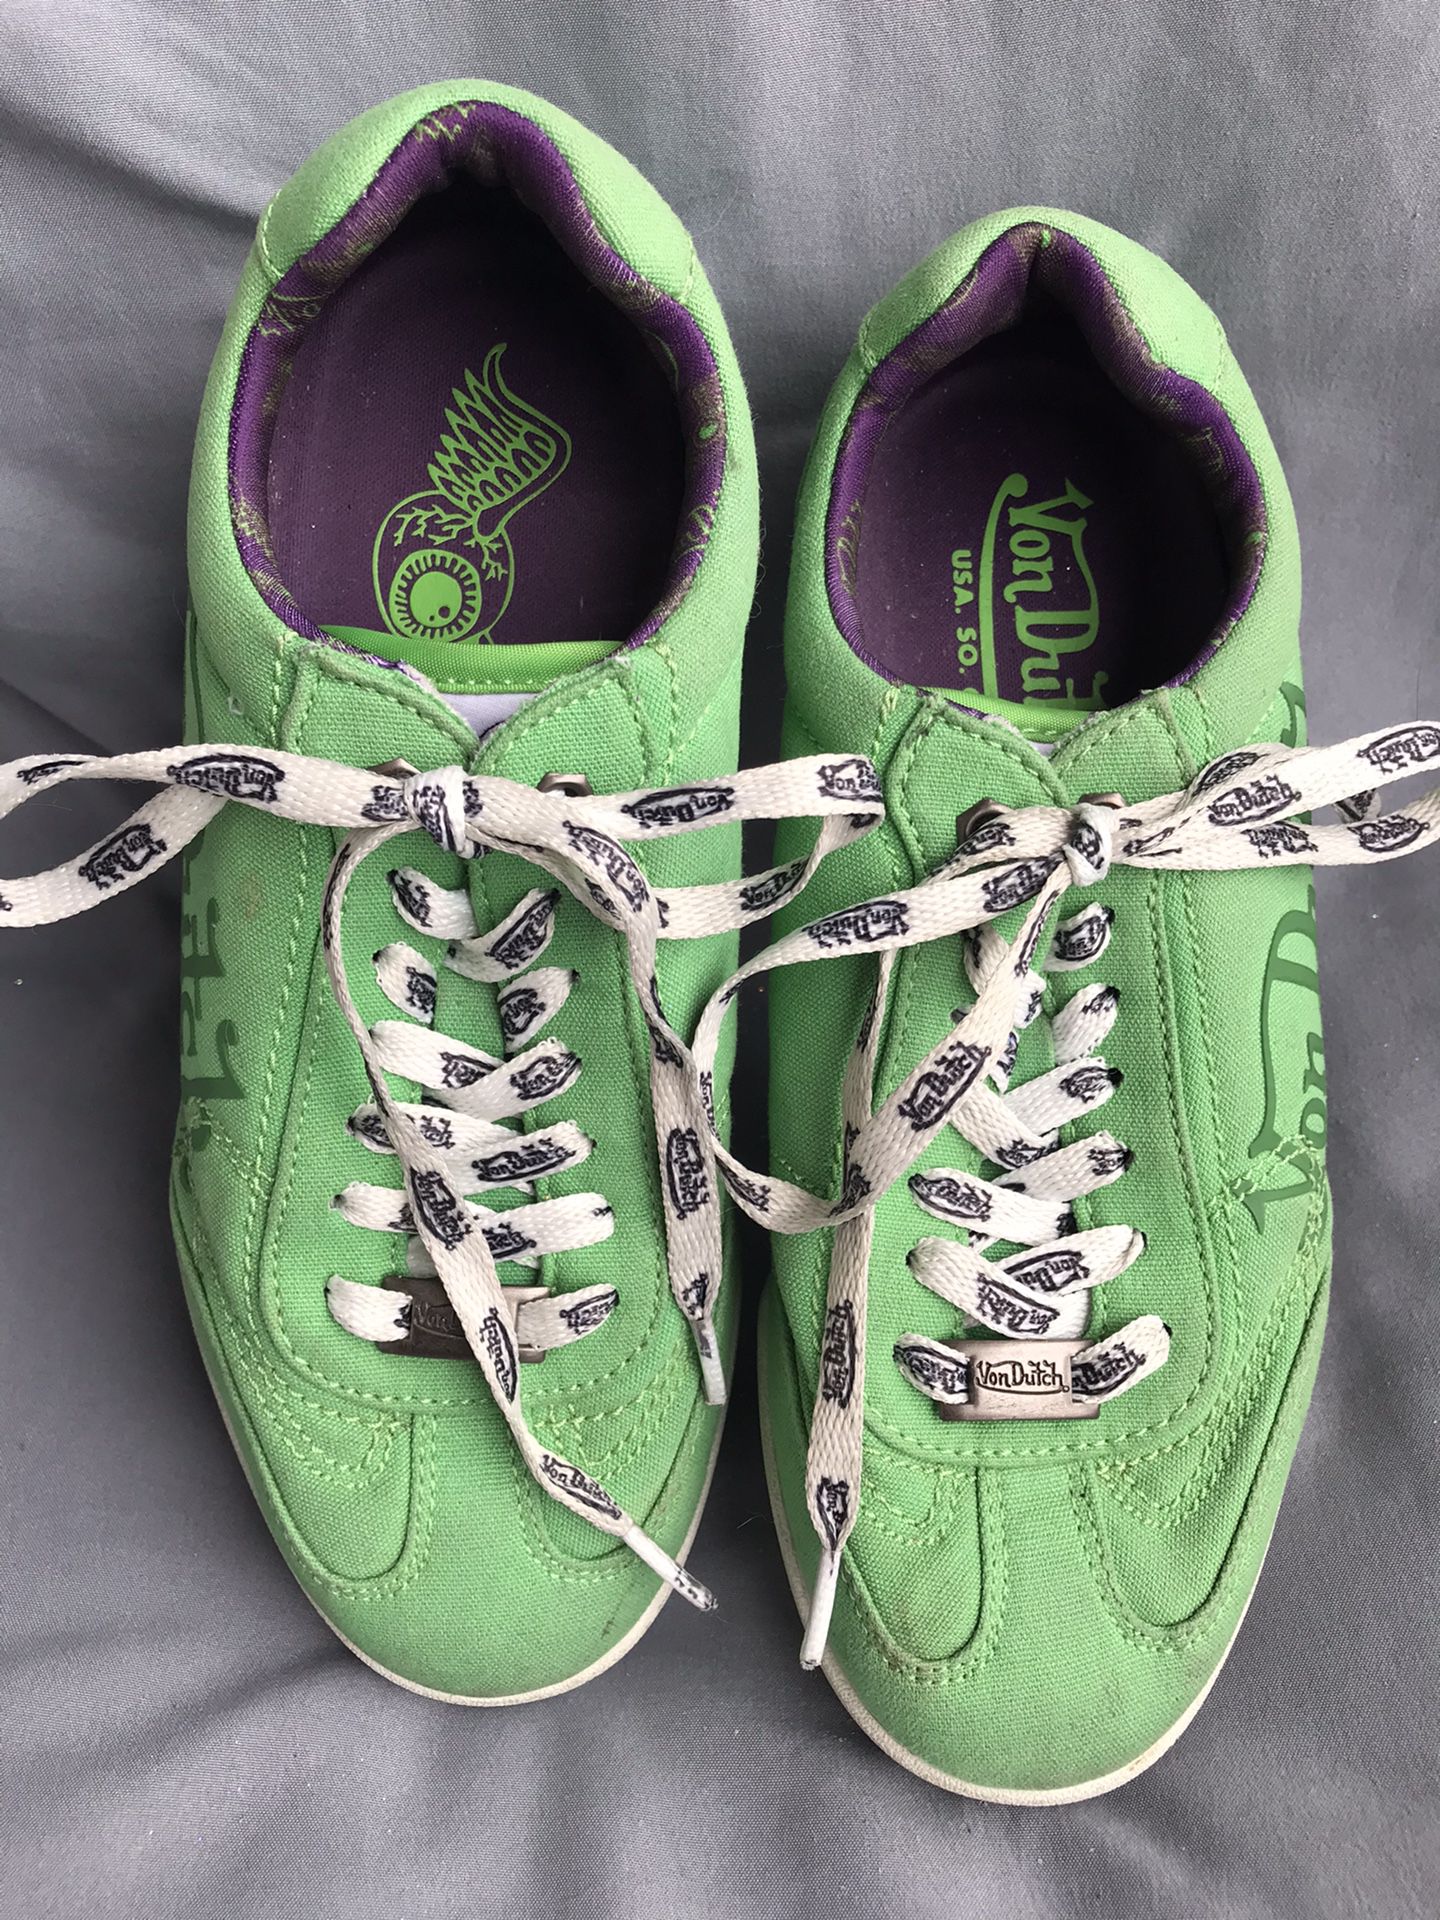 Green Von Dutch Lime Green Shoes Sneakers Kid Size 4 